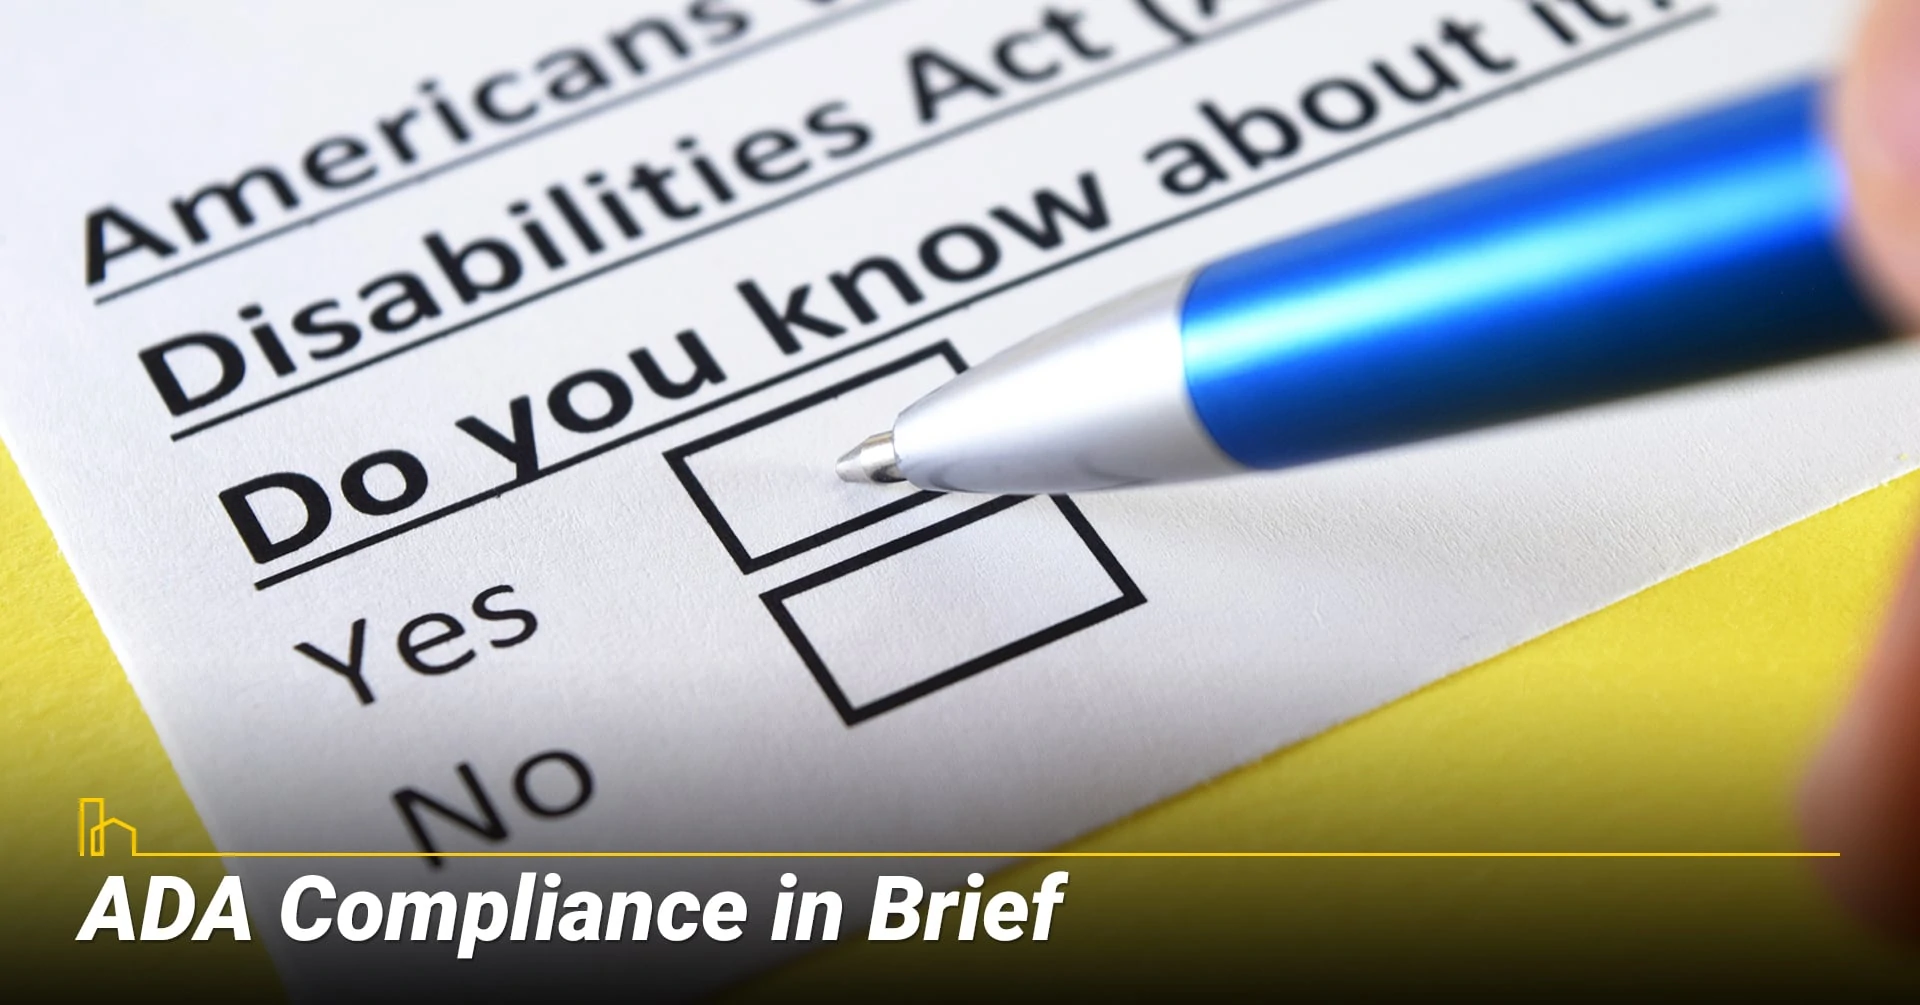 ADA compliance in brief, learn about ADA compliance